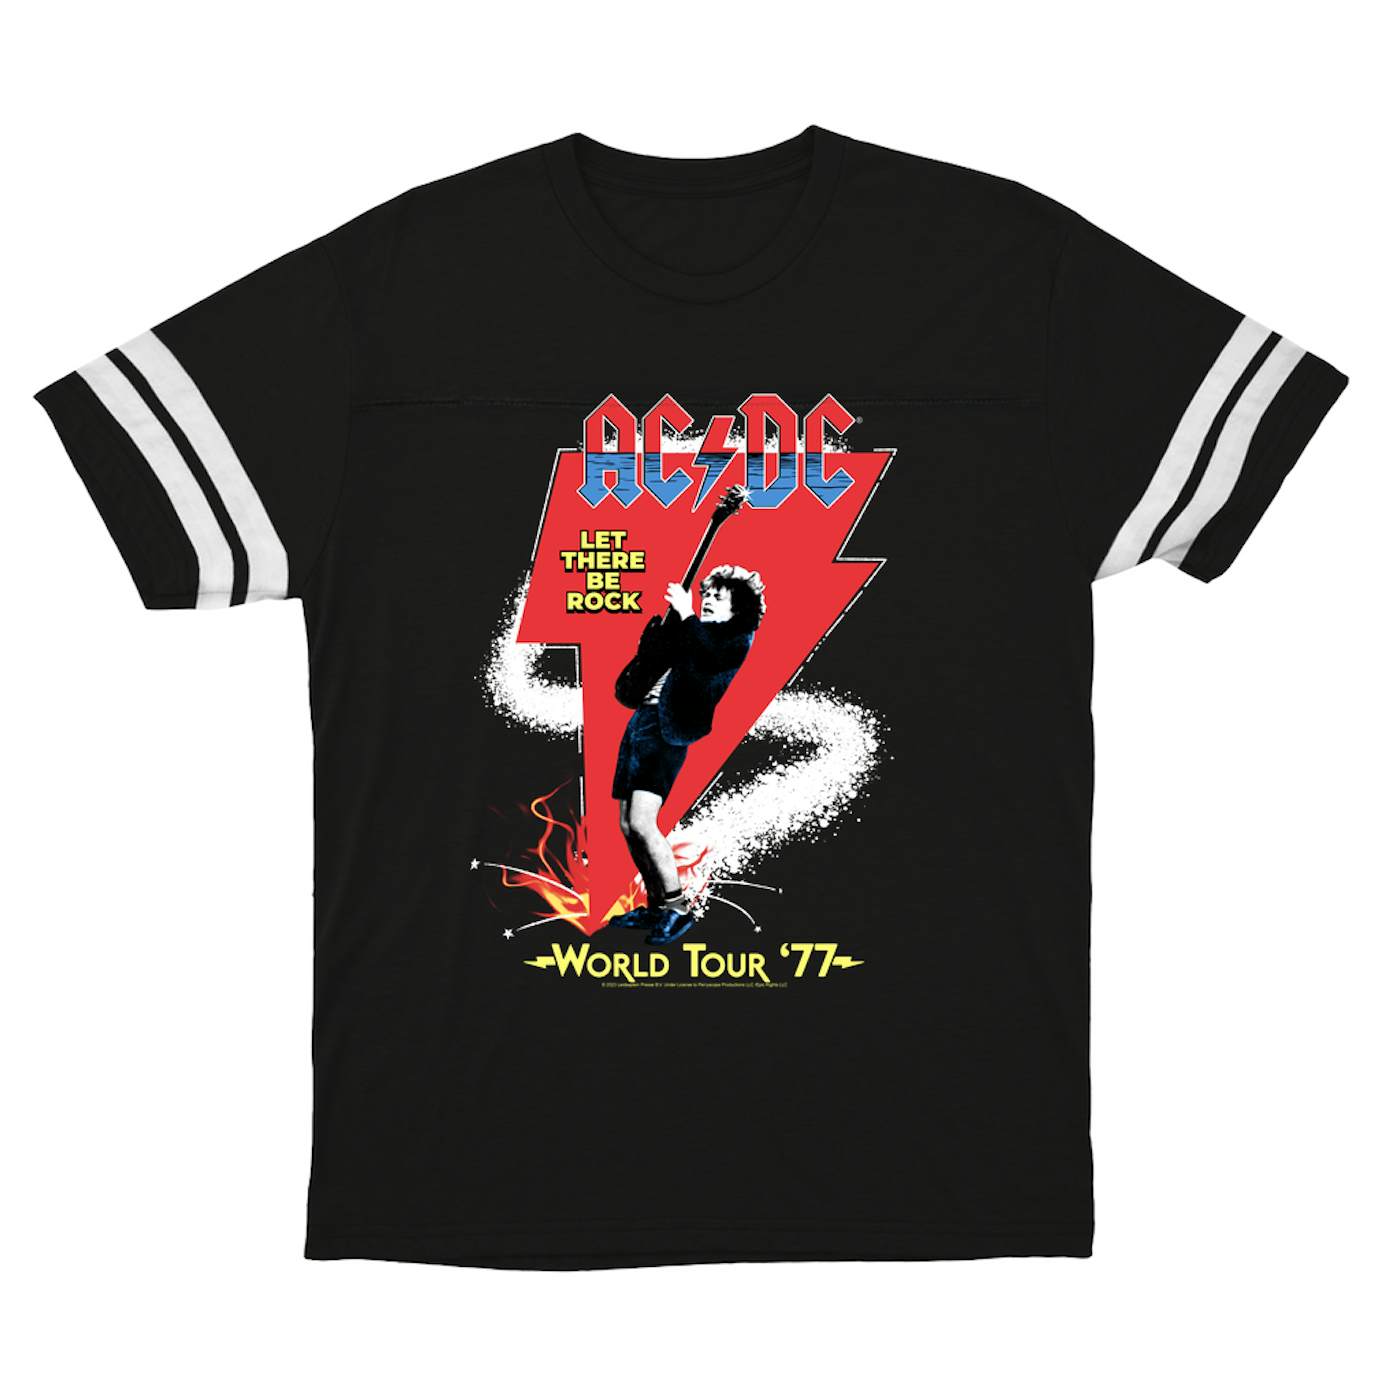 AC/DC Let There Be Rock T-Shirt-2XLarge